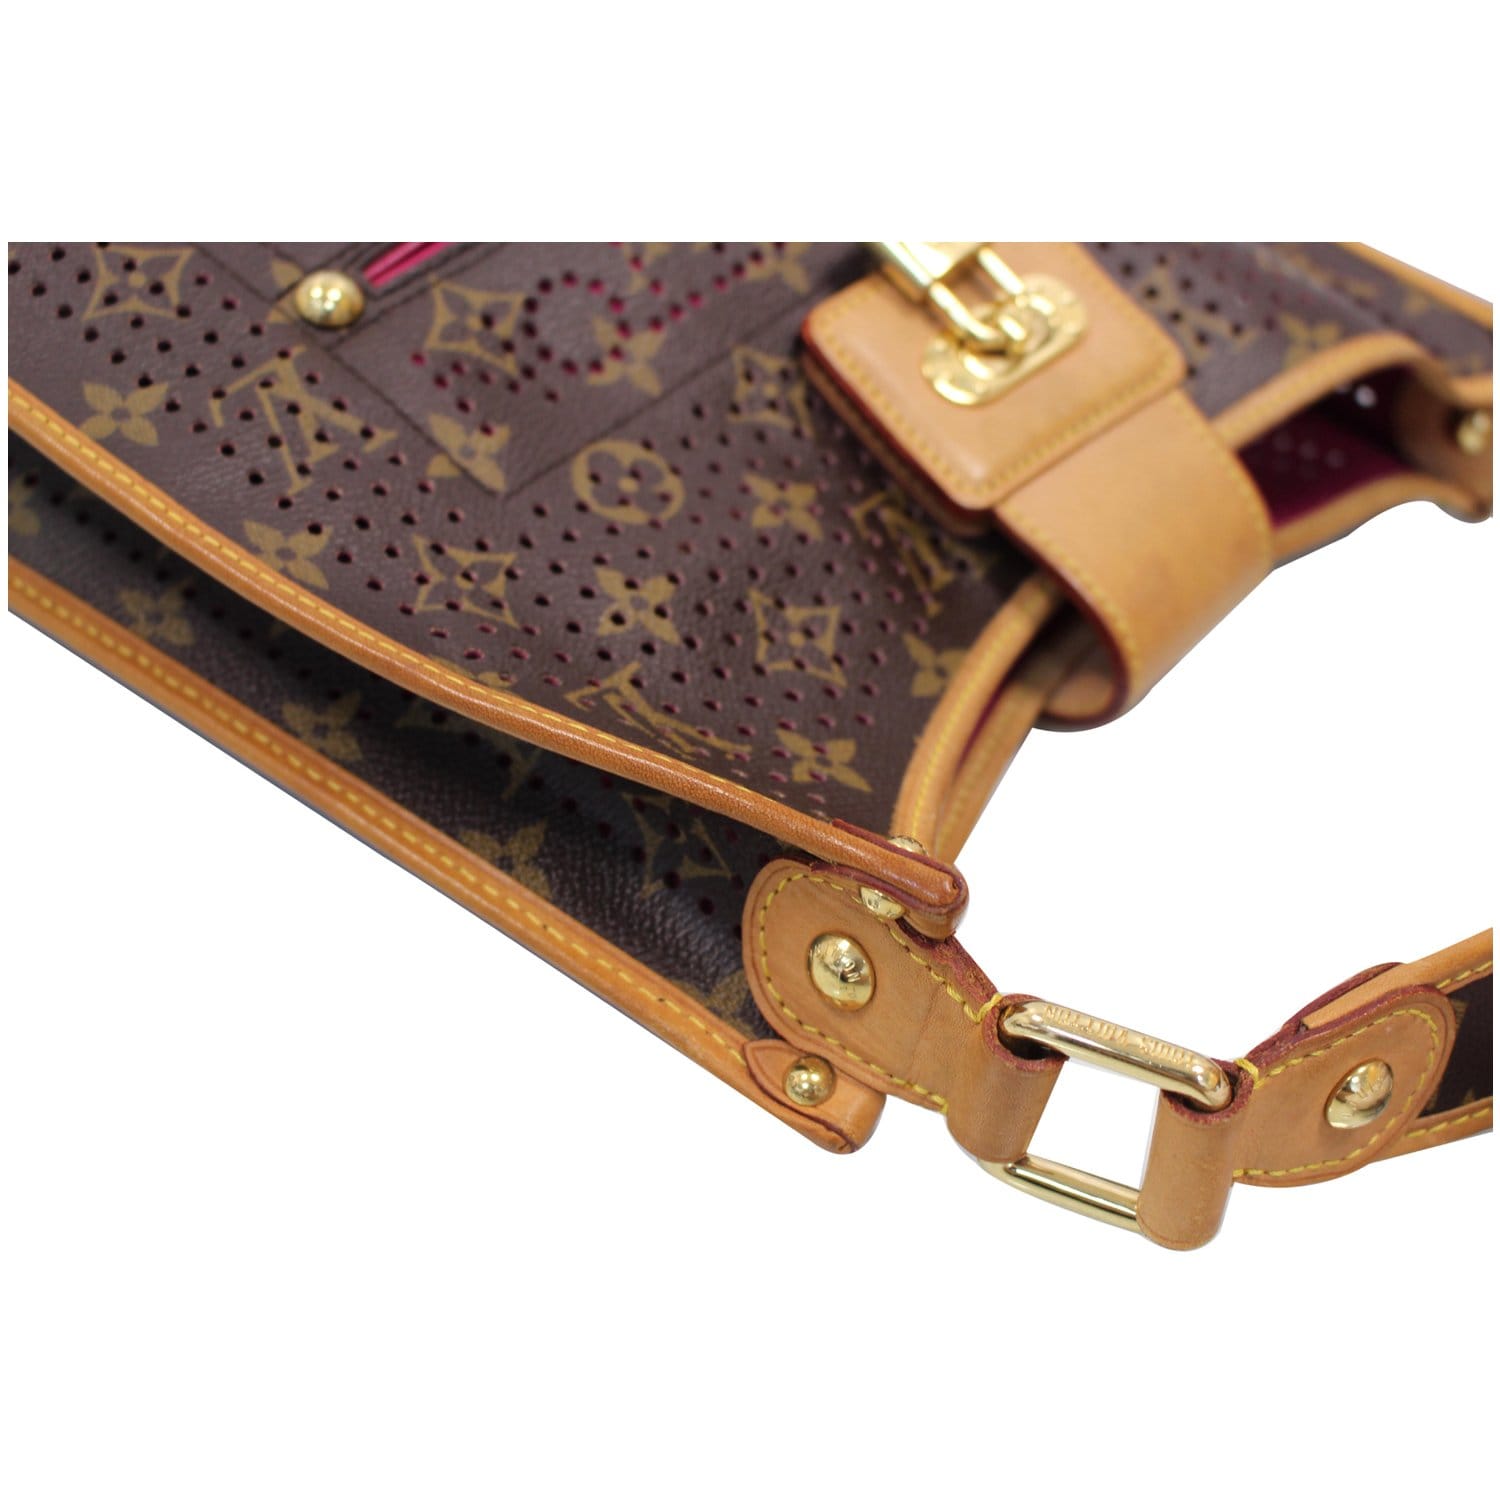 LOUIS VUITTON Perforated Musette Monogram Canvas Crossbody Bag Brown-US